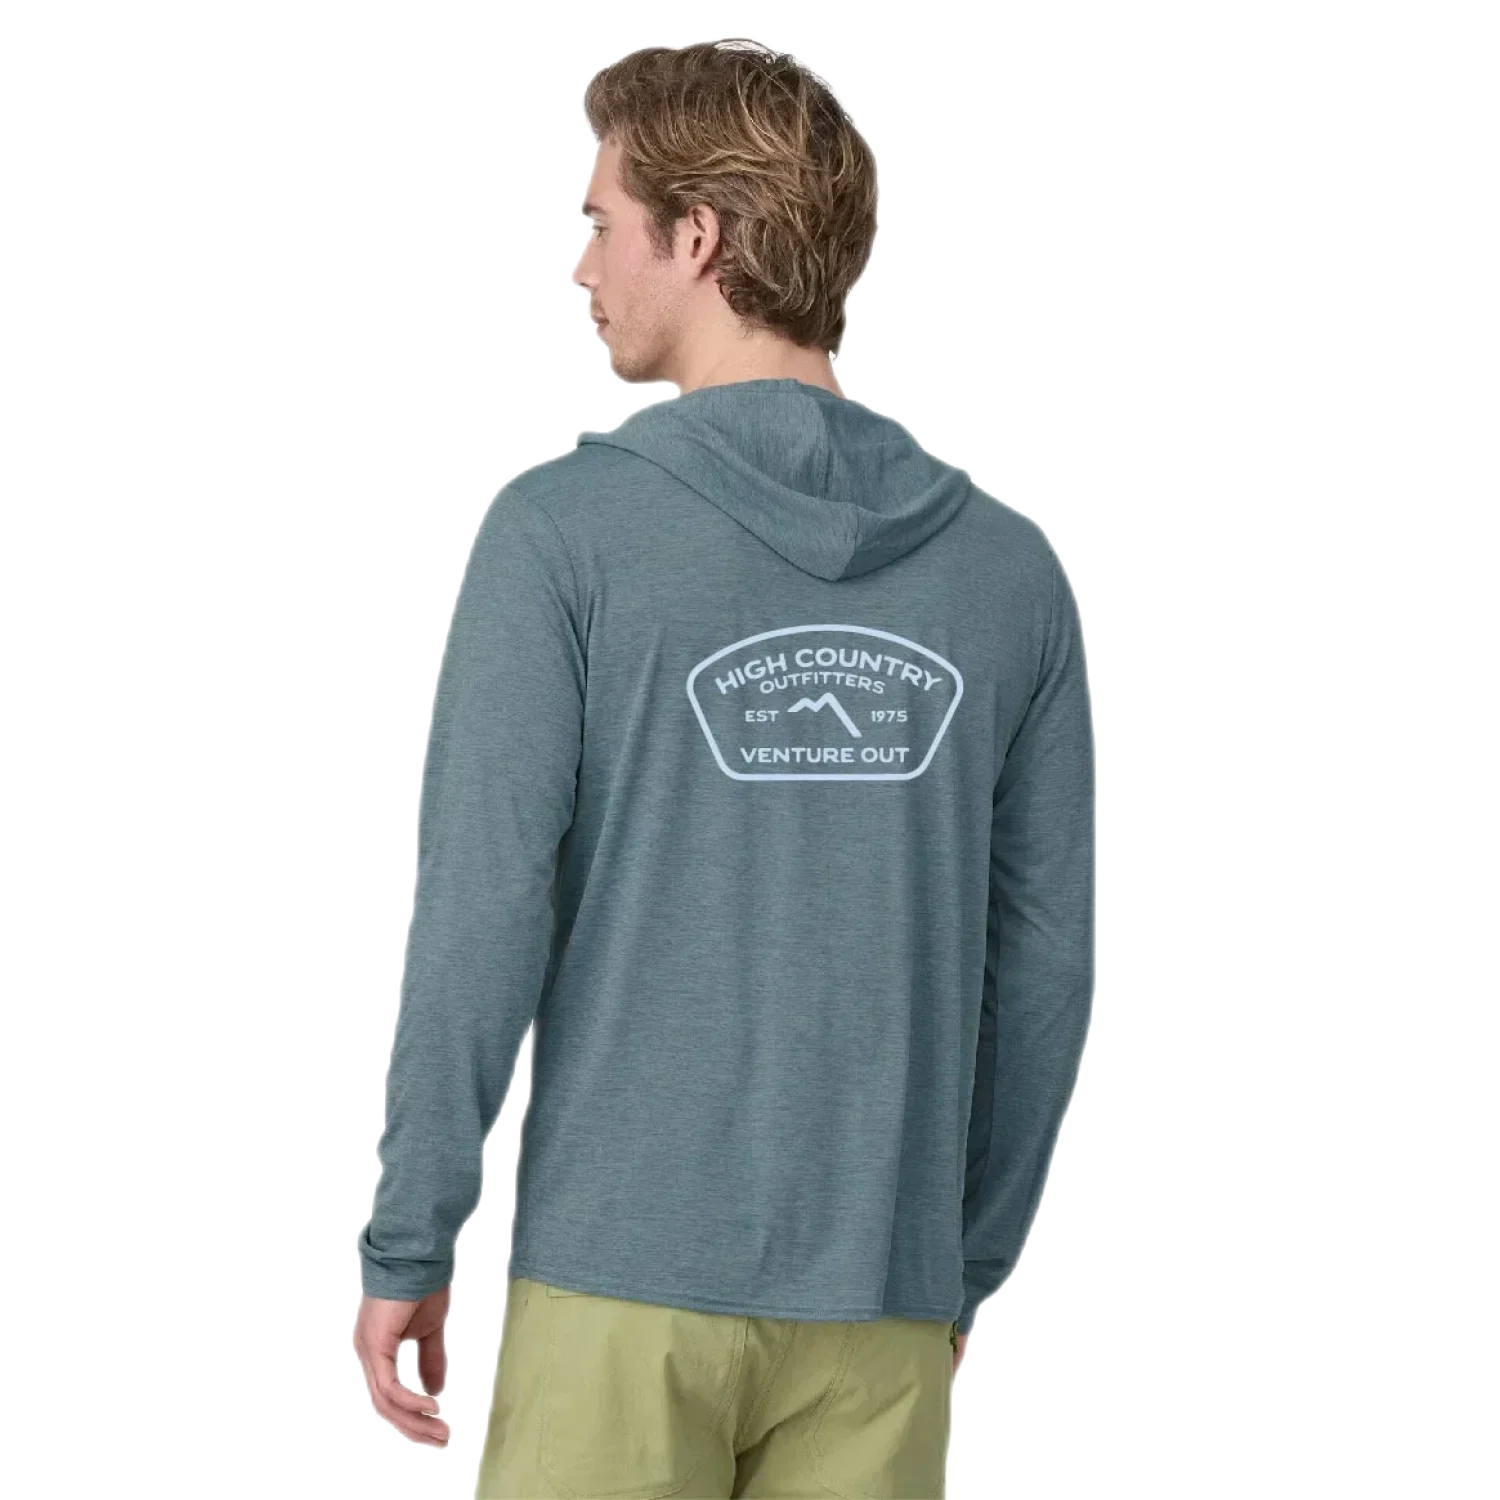 High Country Outfitters 01. MENS APPAREL - MENS LS SHIRTS - MENS LS HOODY Men's HC Capilene Cool Daily Hoody UTBX UTILITY BLUE - LIGHT UTILITY BLUE X-DYE